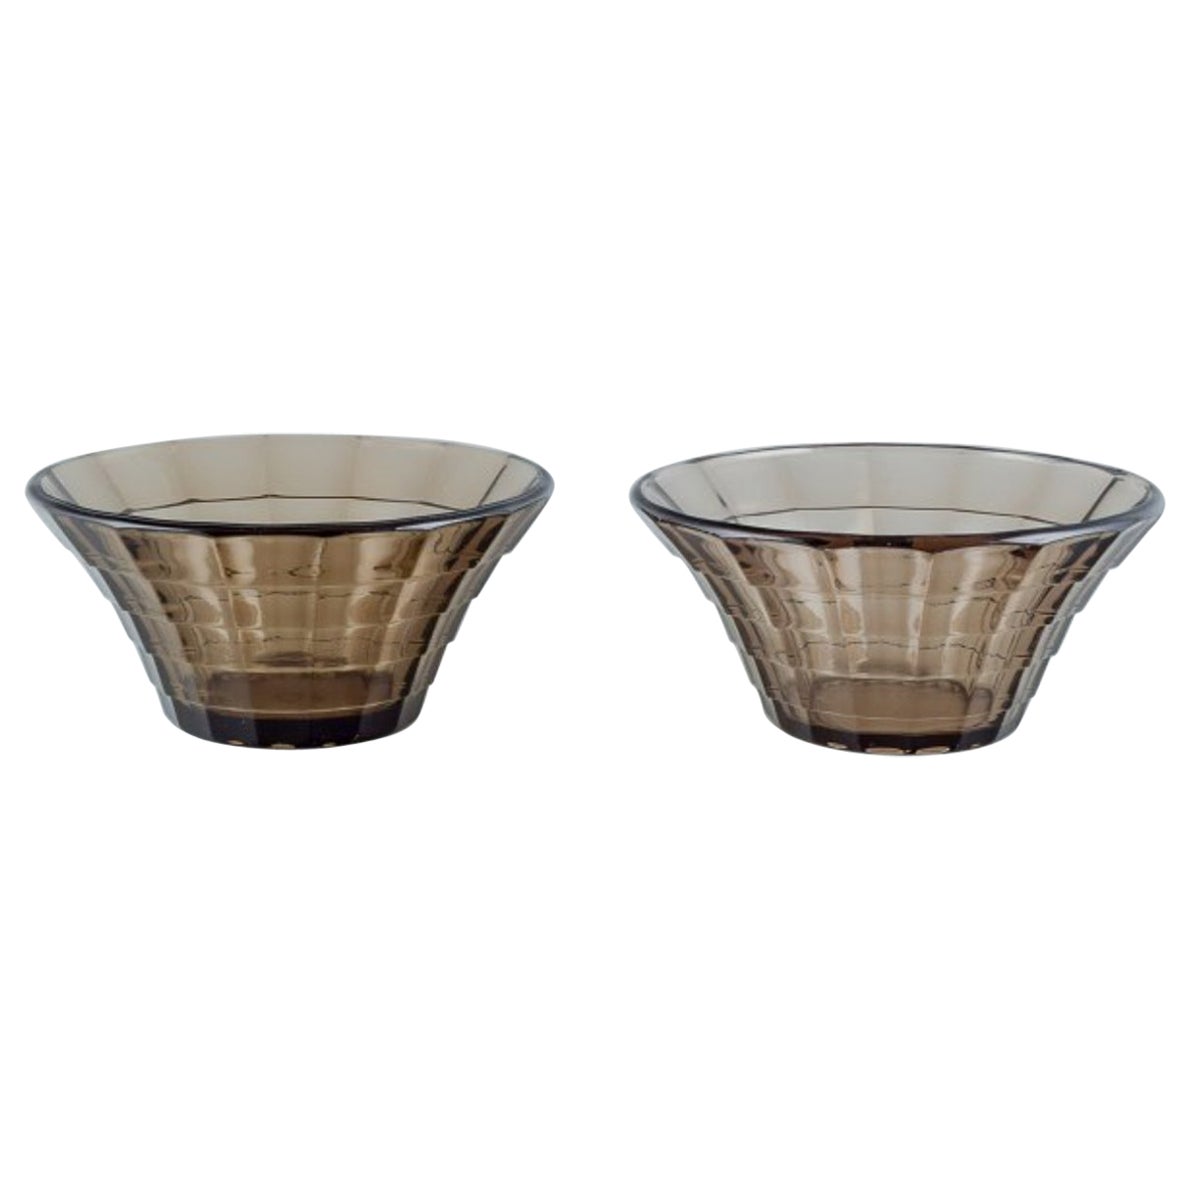 Simon Gate for Orrefors/Sandvik. Two bowls in smoked coloured pressed glass For Sale